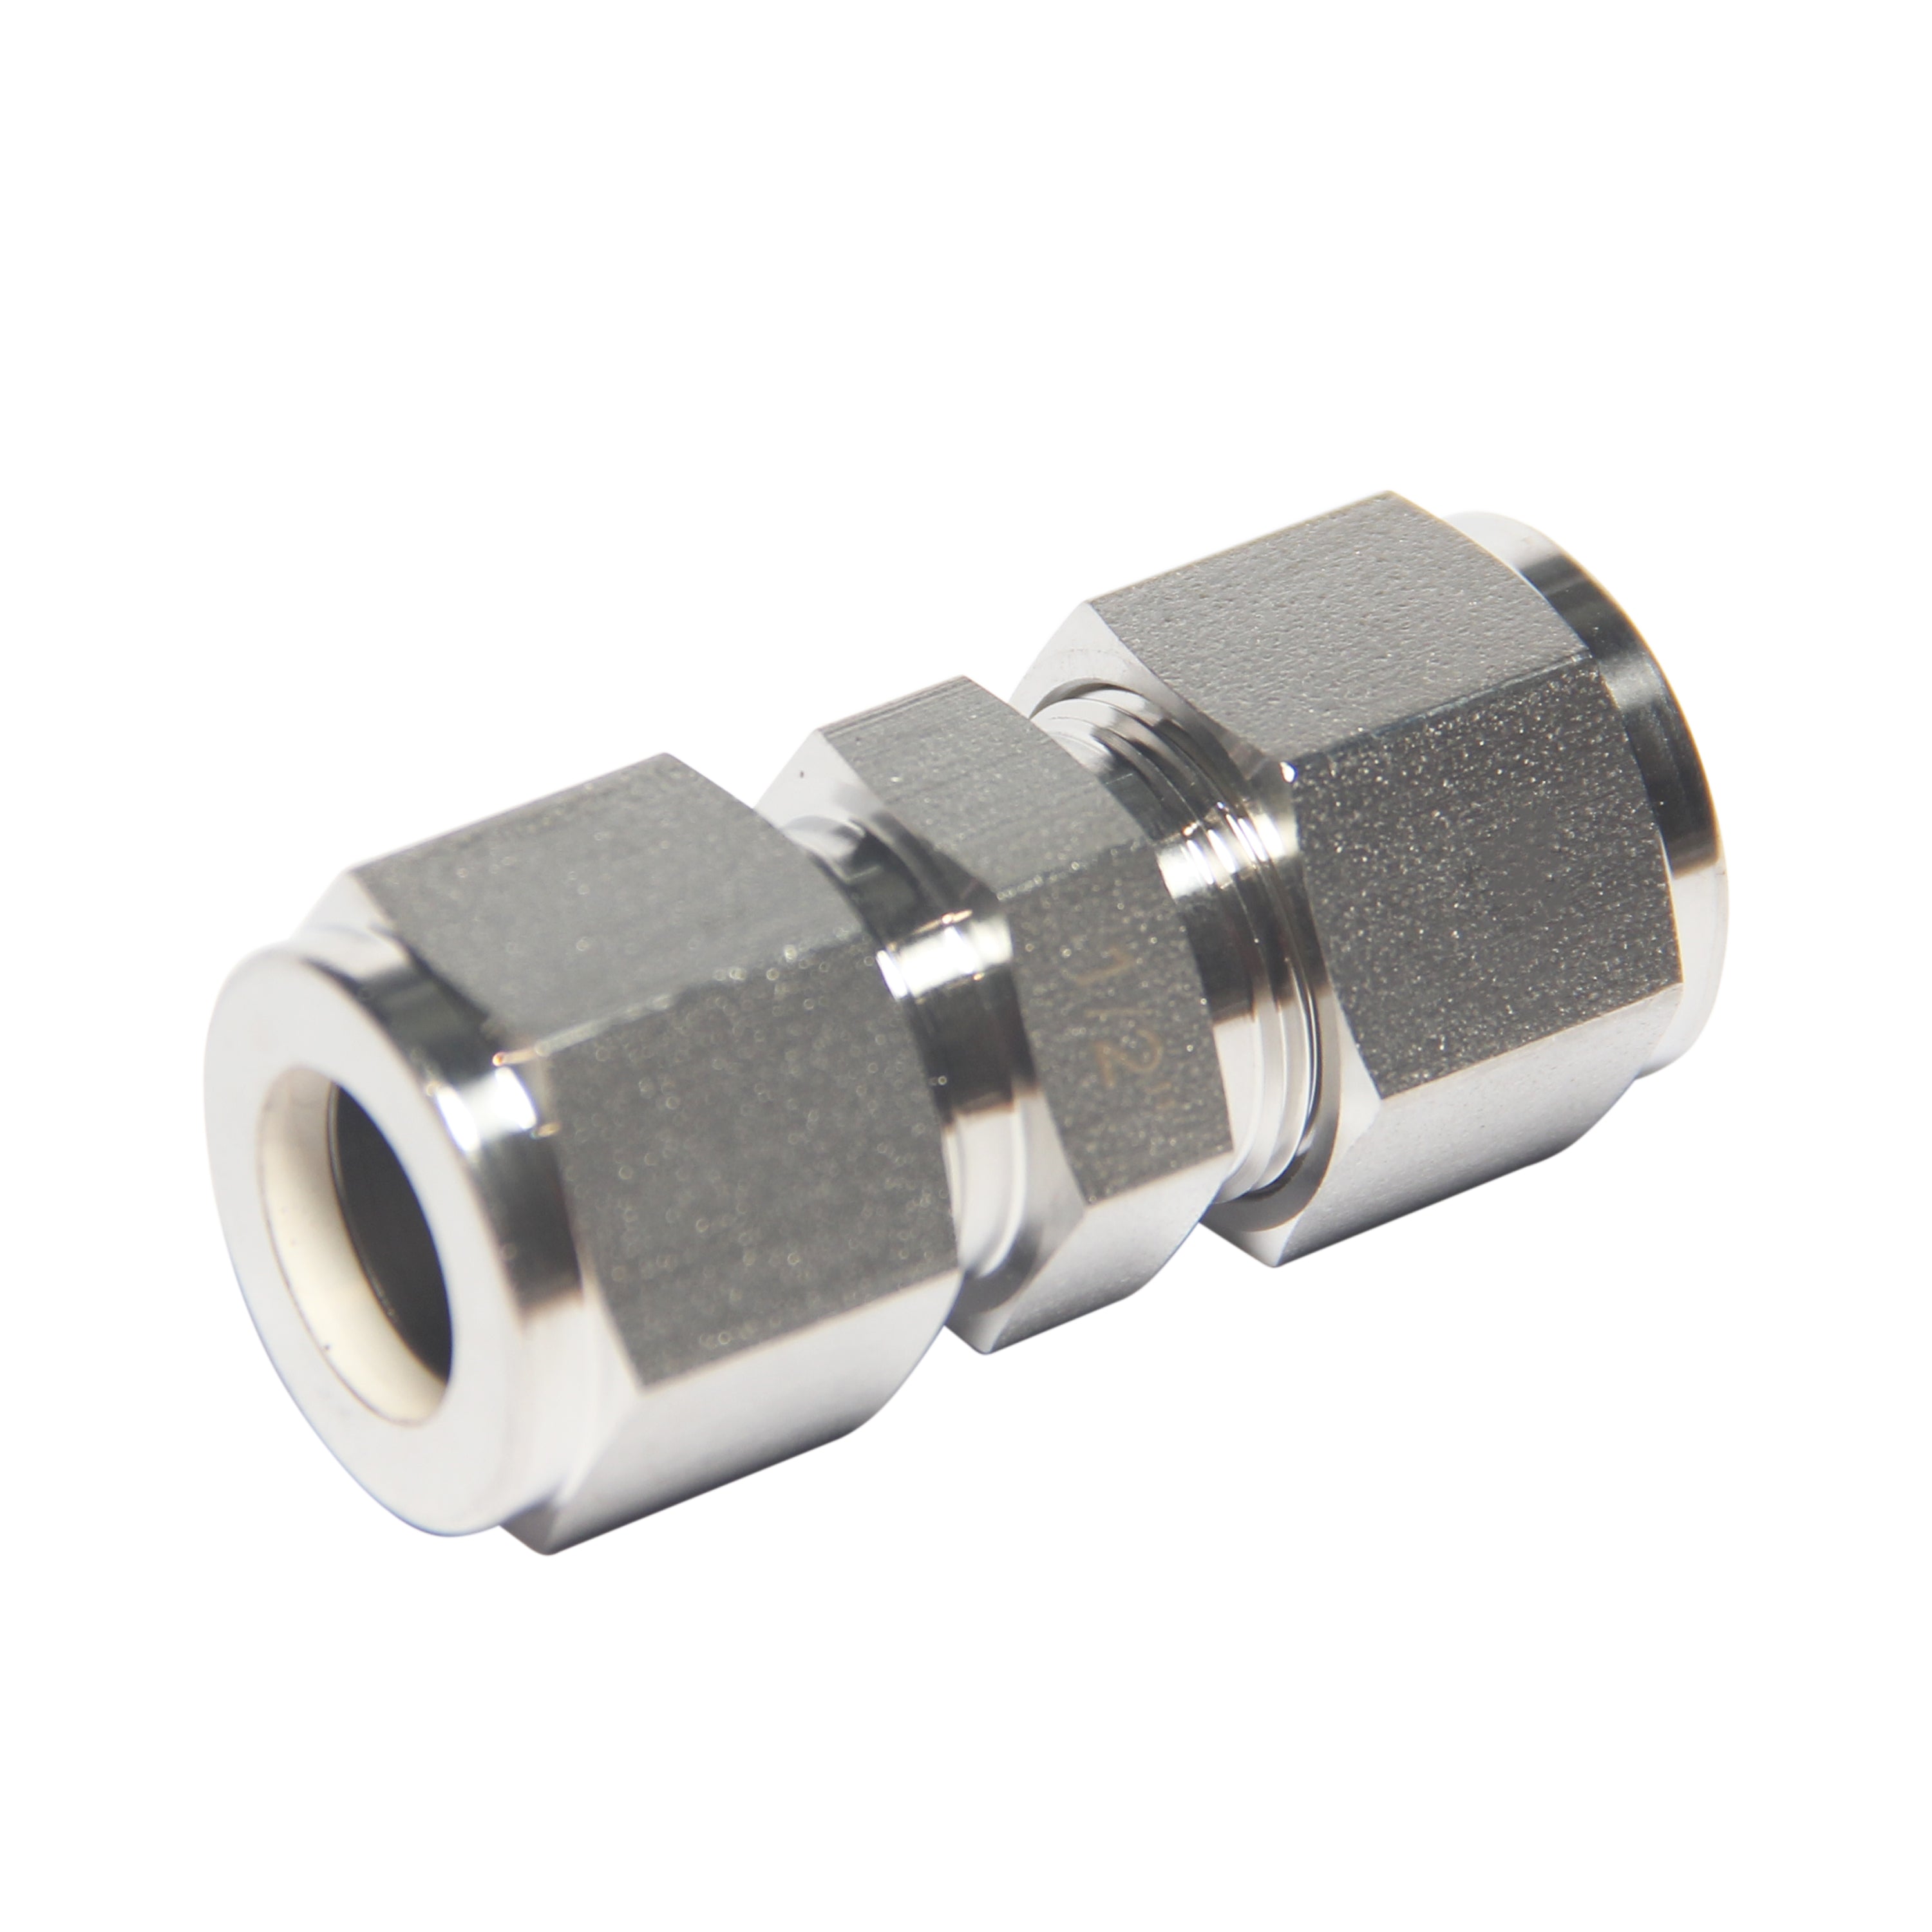 Compression Tube Fitting Union 1/2 Tube OD Adapter Stainless